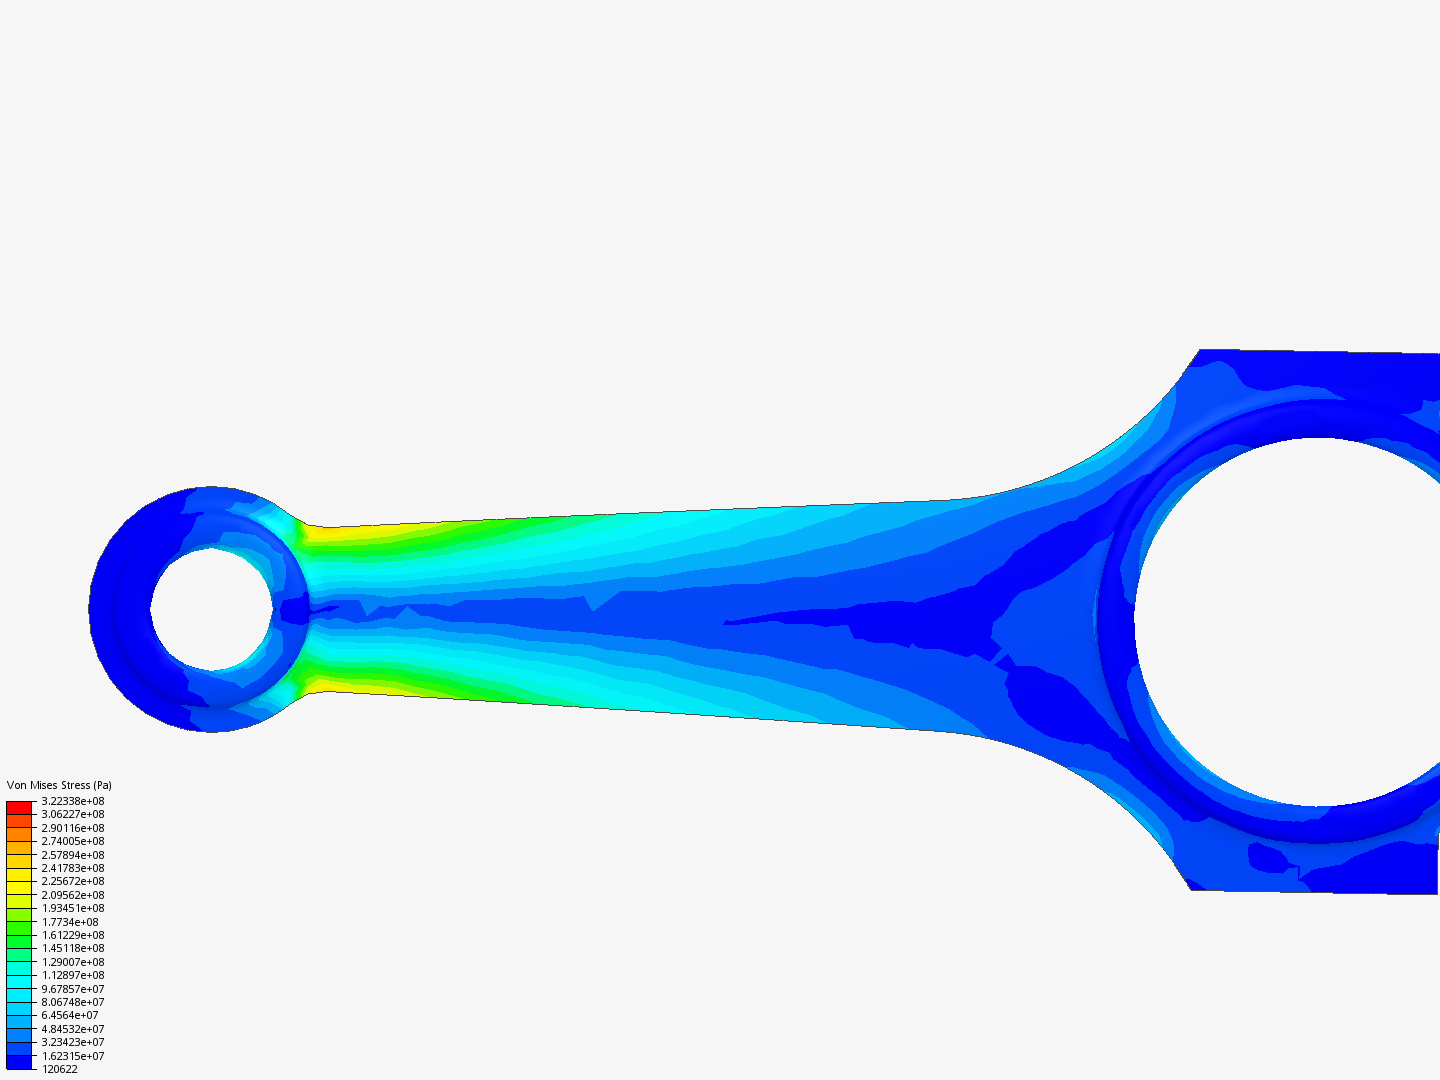 ANALYSIS 1 CONNECTING ROD - Copy image